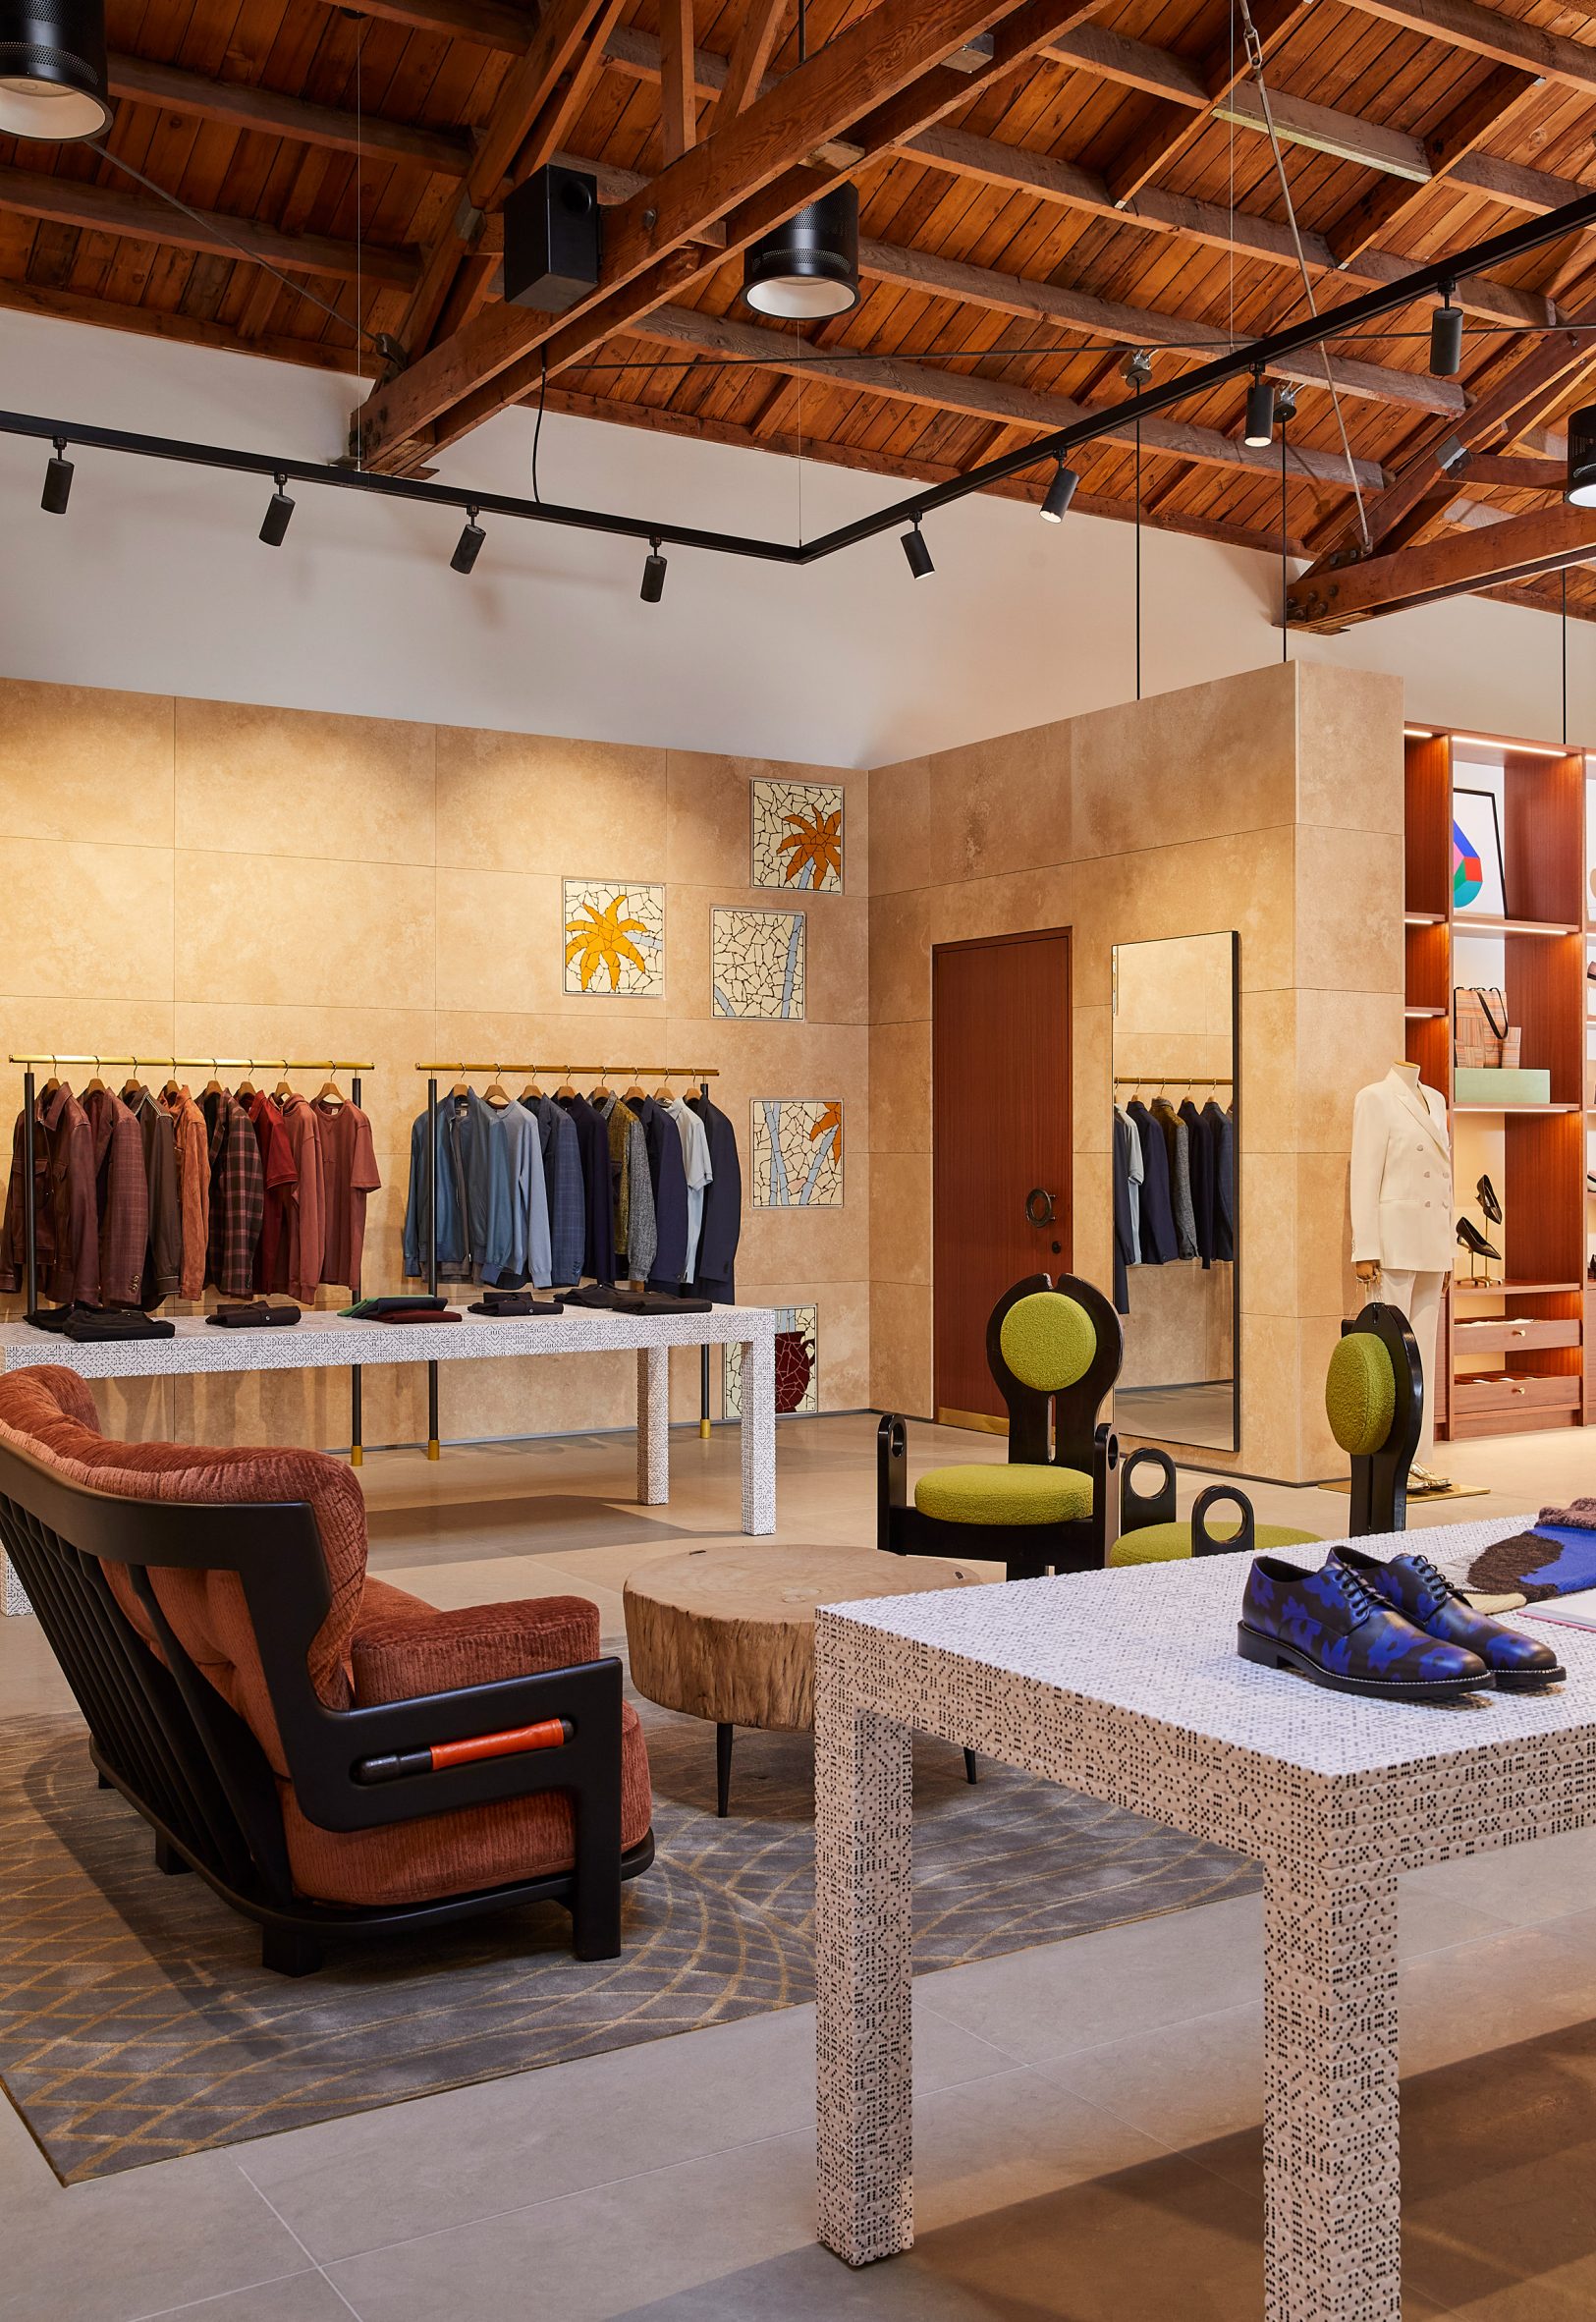 Paul Smith LA store interior is stone-clad partitions and exposed rafters